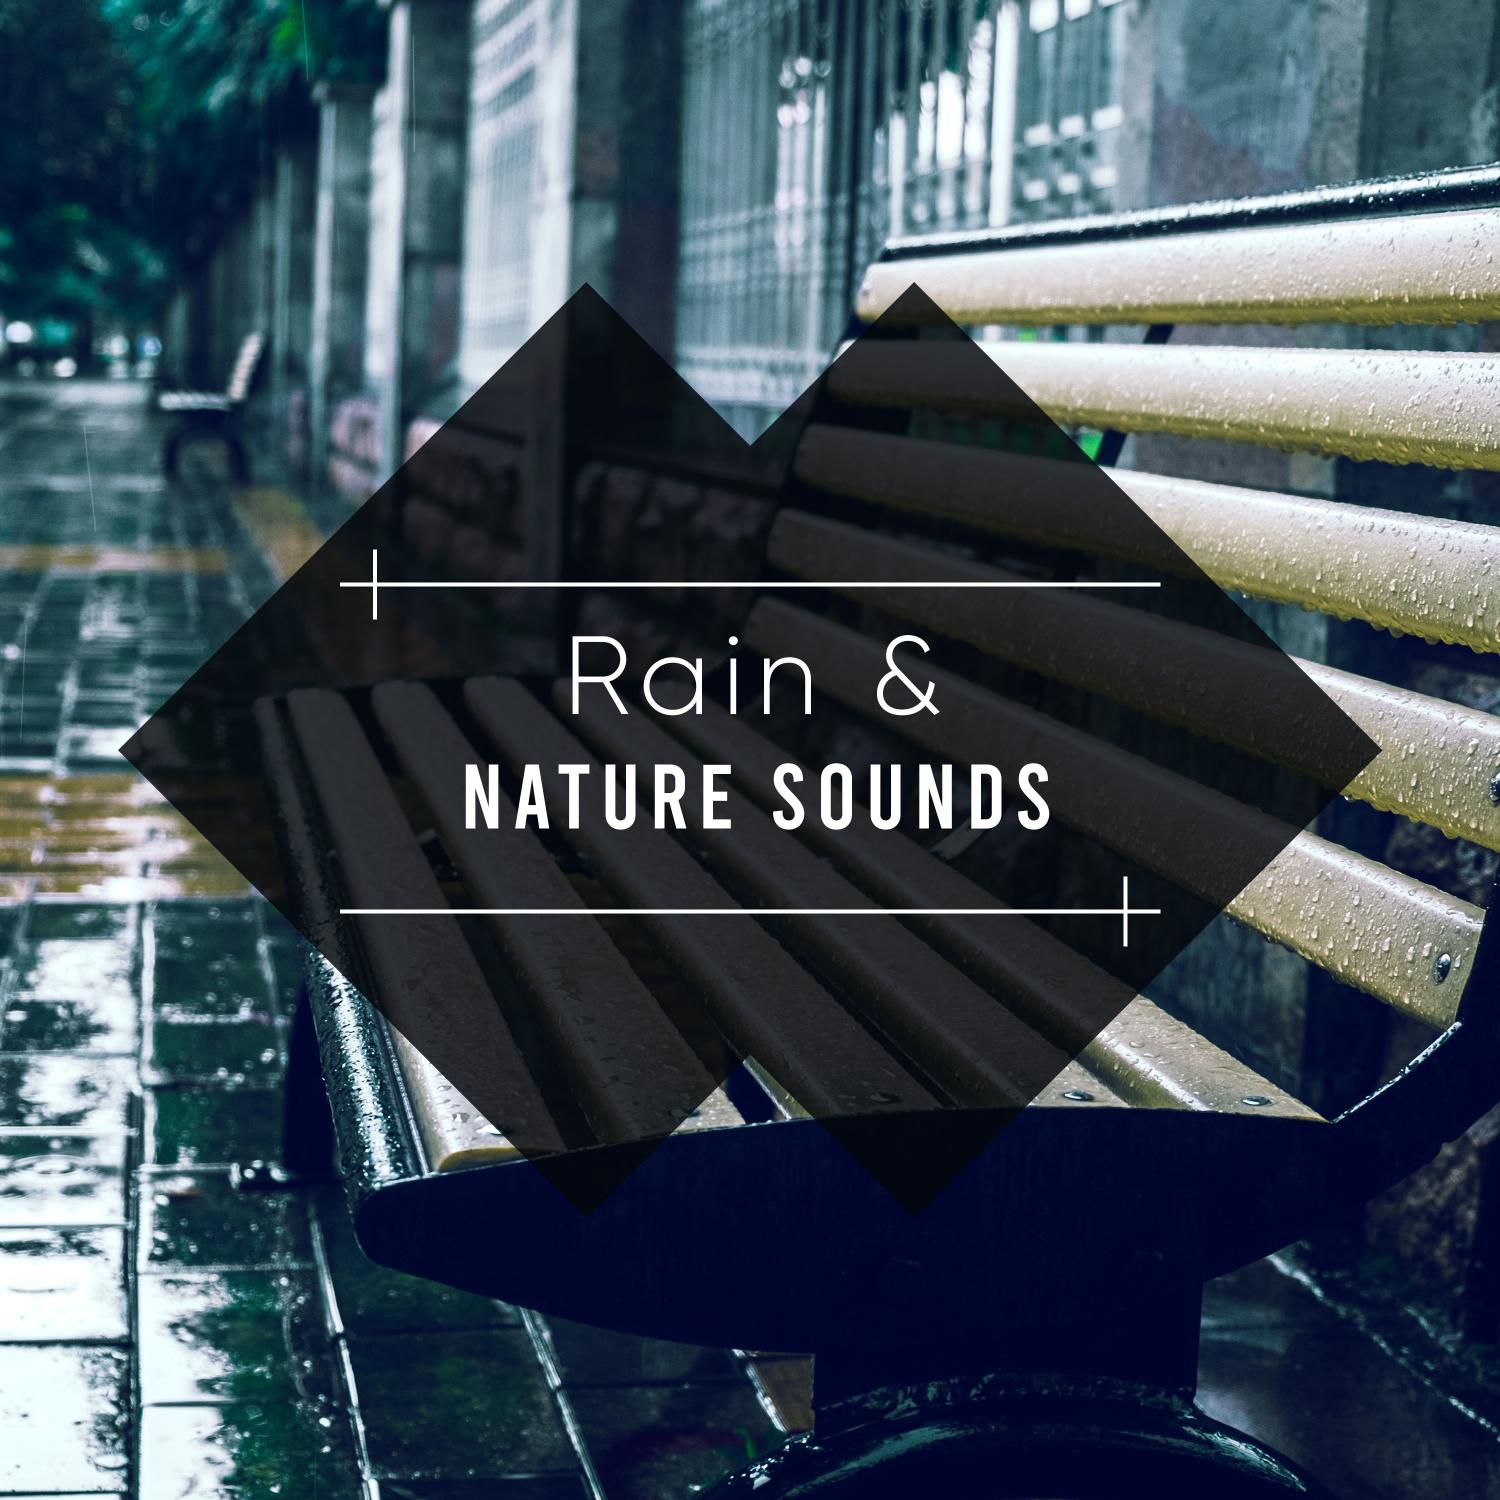 15 Rain & Nature Sounds for Relaxation, Sleep, Meditation and Soothing Babies